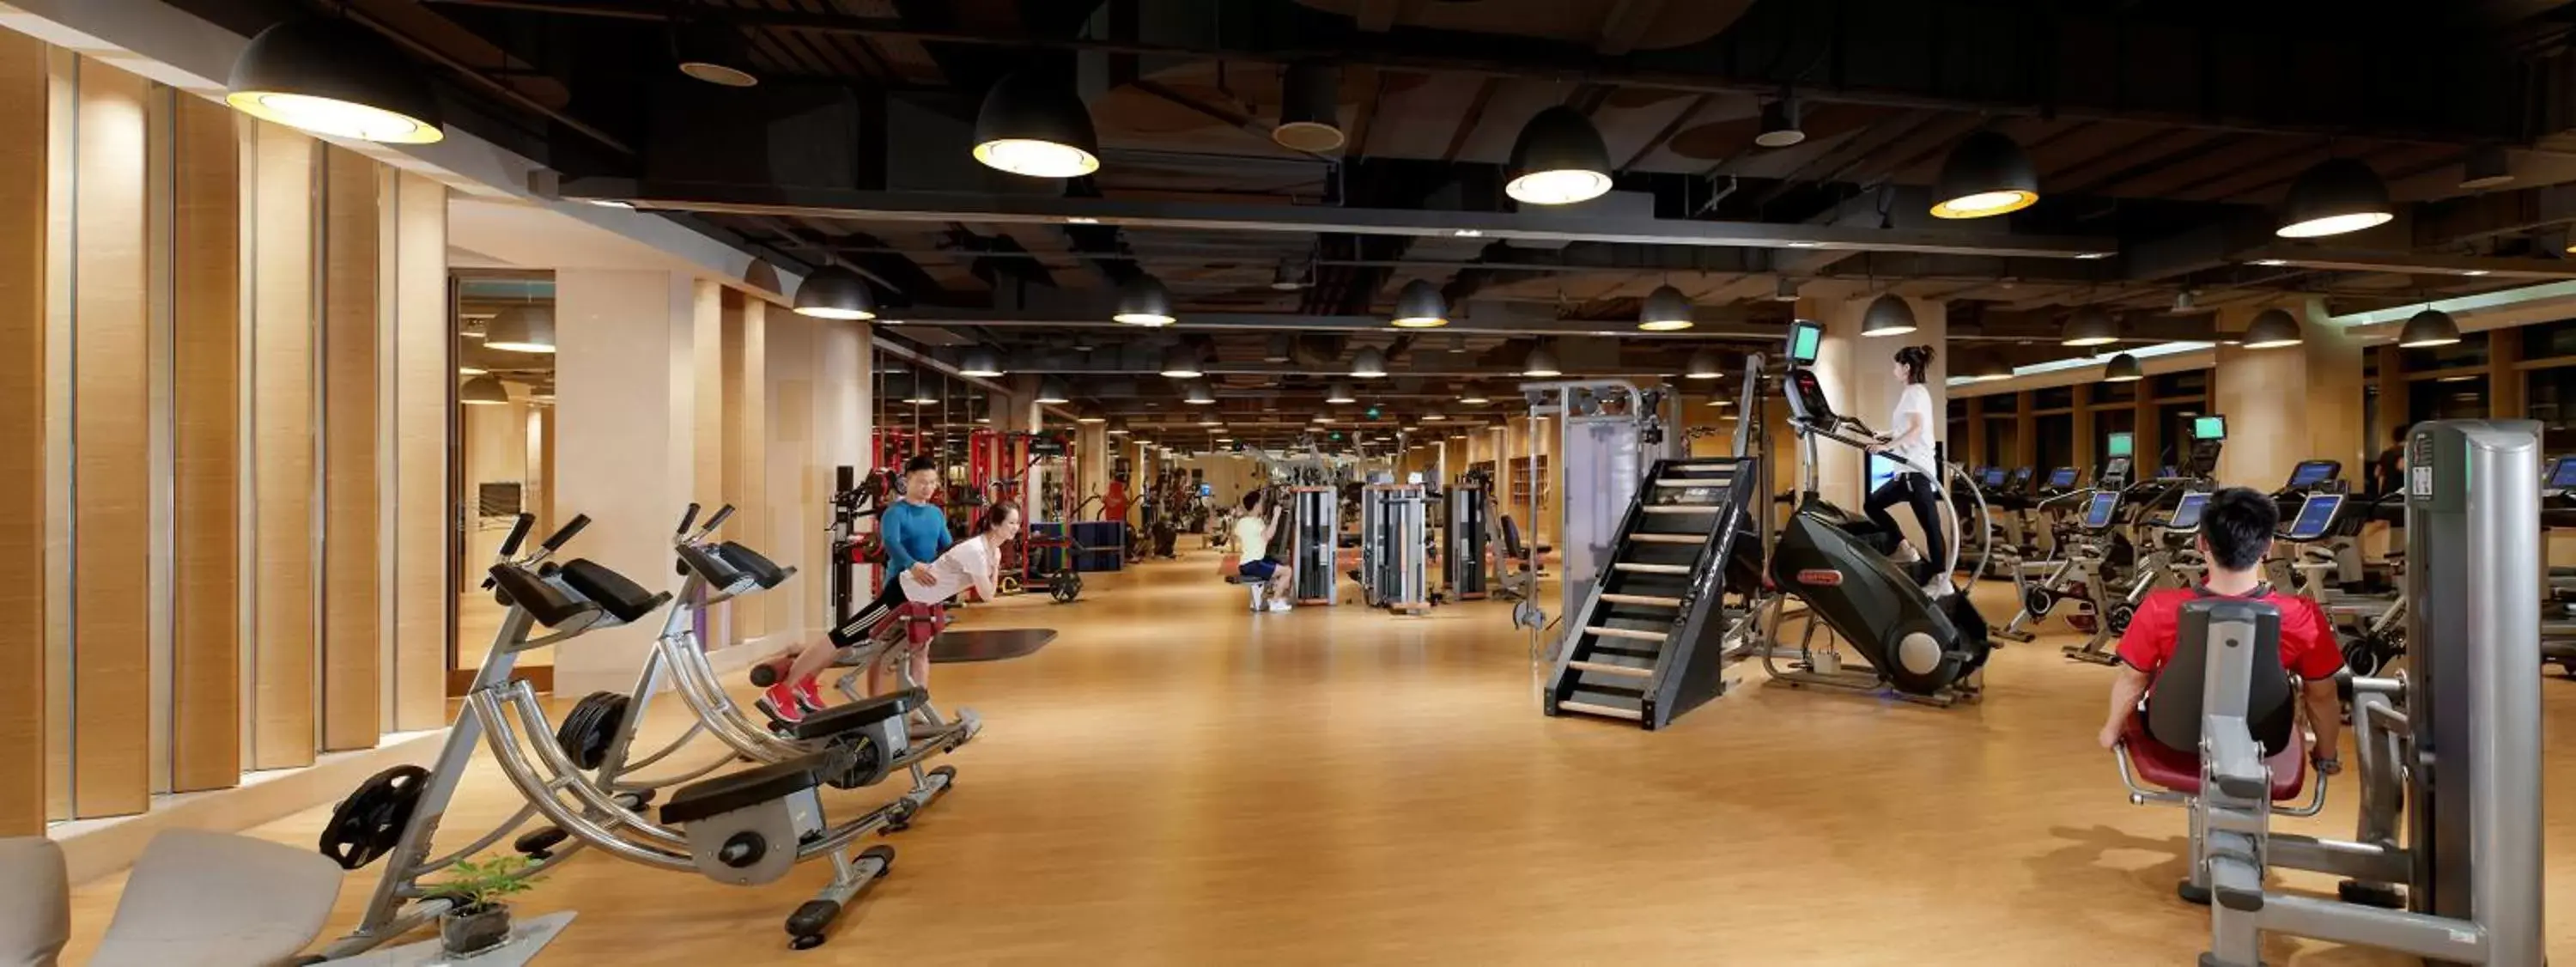 Fitness centre/facilities, Fitness Center/Facilities in Kerry Hotel, Beijing